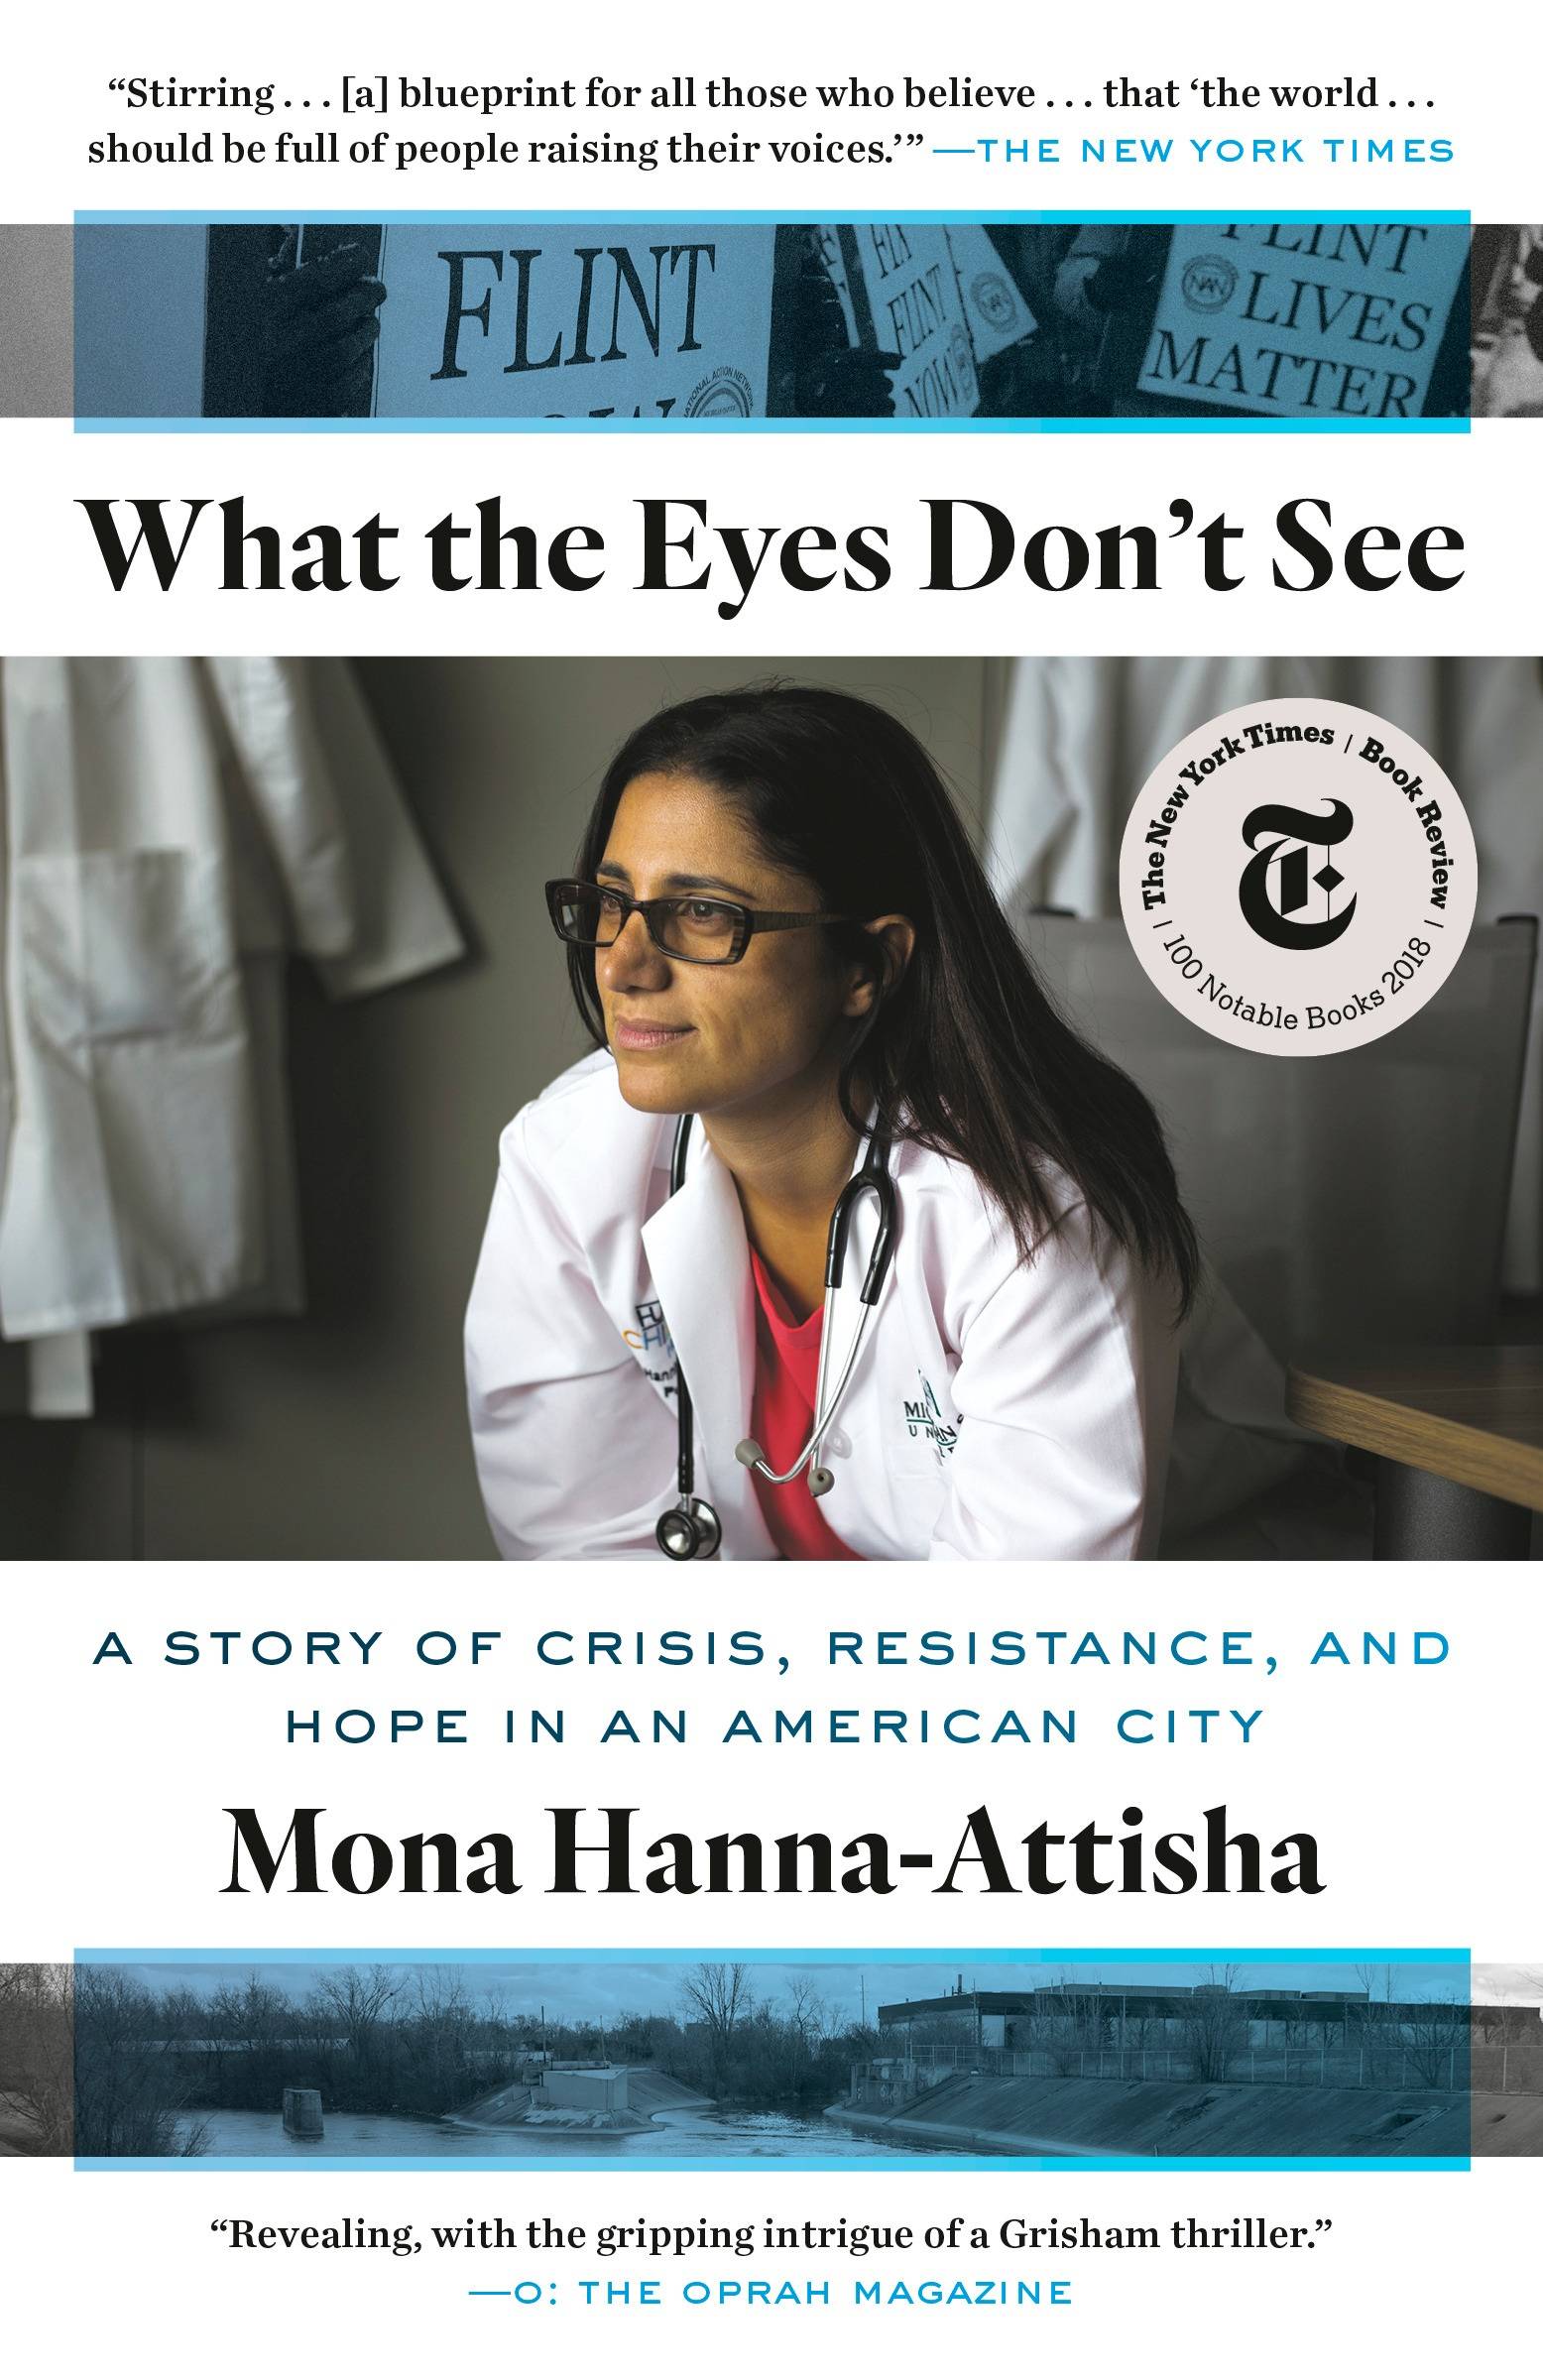 "What the Eyes Don't See: A Story of Crisis, Resistance, and Hope in an American City" by Dr. Mona Hanna-Attisha